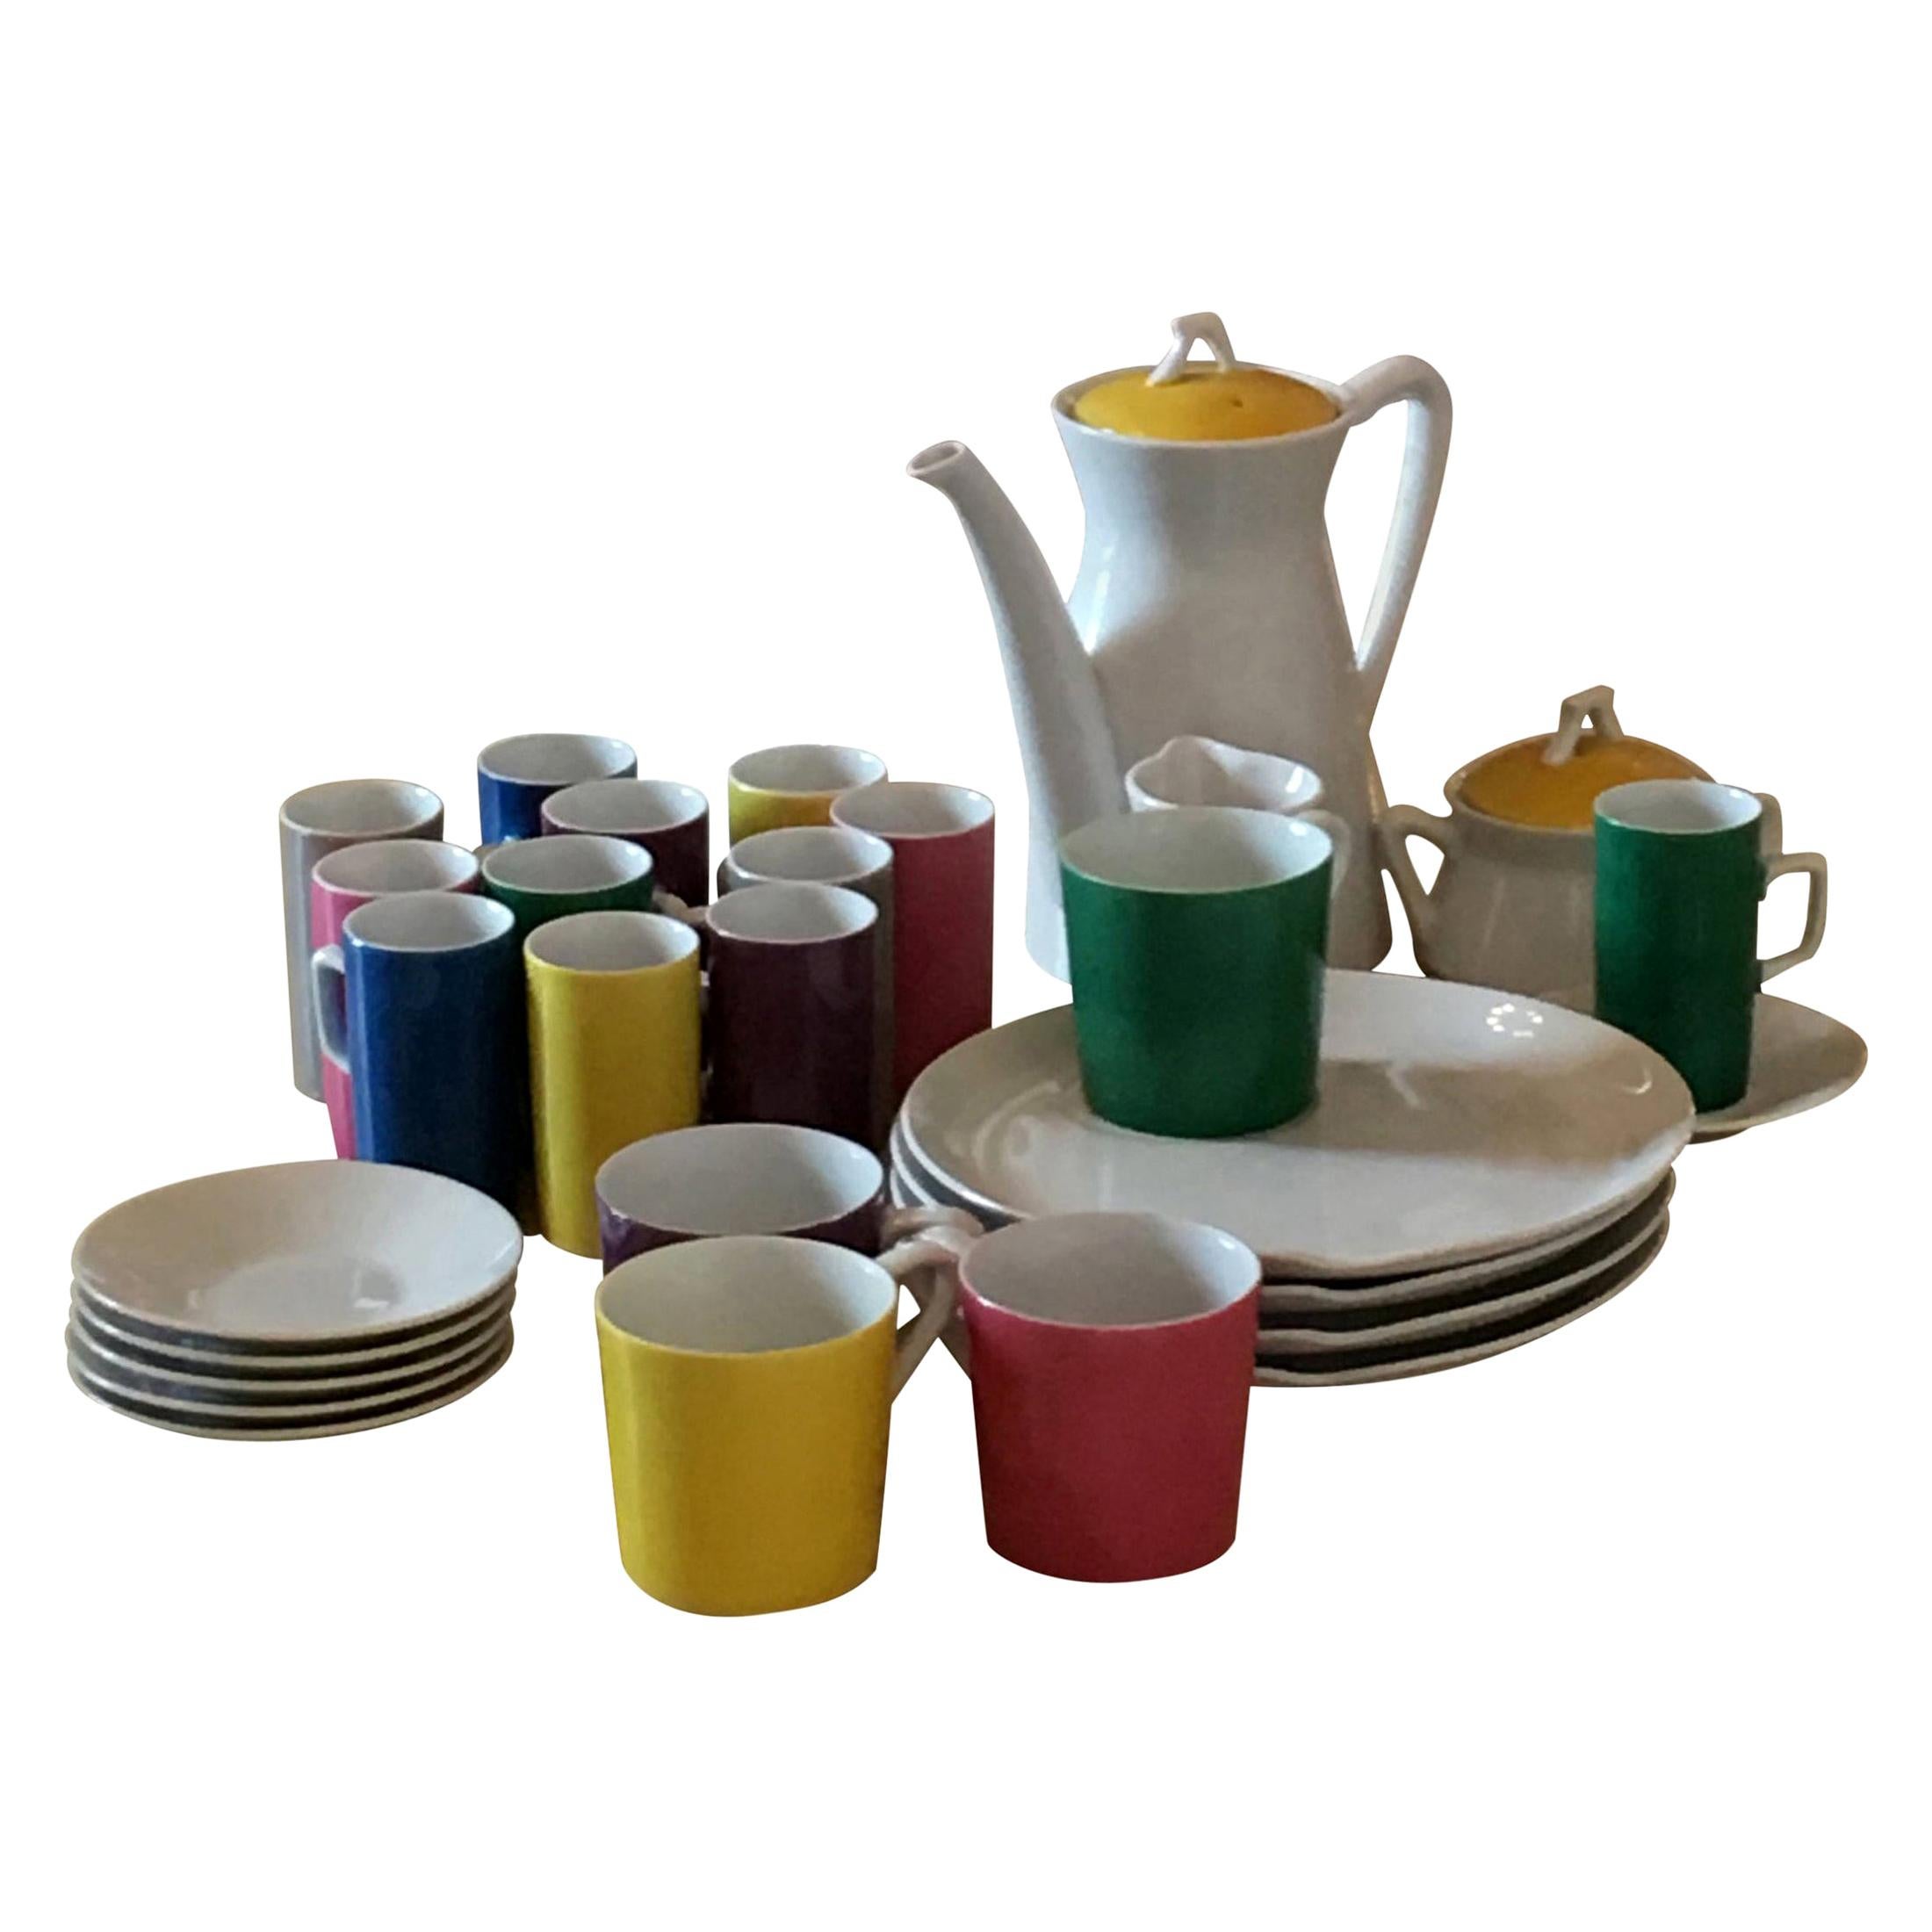 Green, Blue, Yellow, Pink and Gray Porcelain Coffee, Tea & Dessert Cups & Plates For Sale